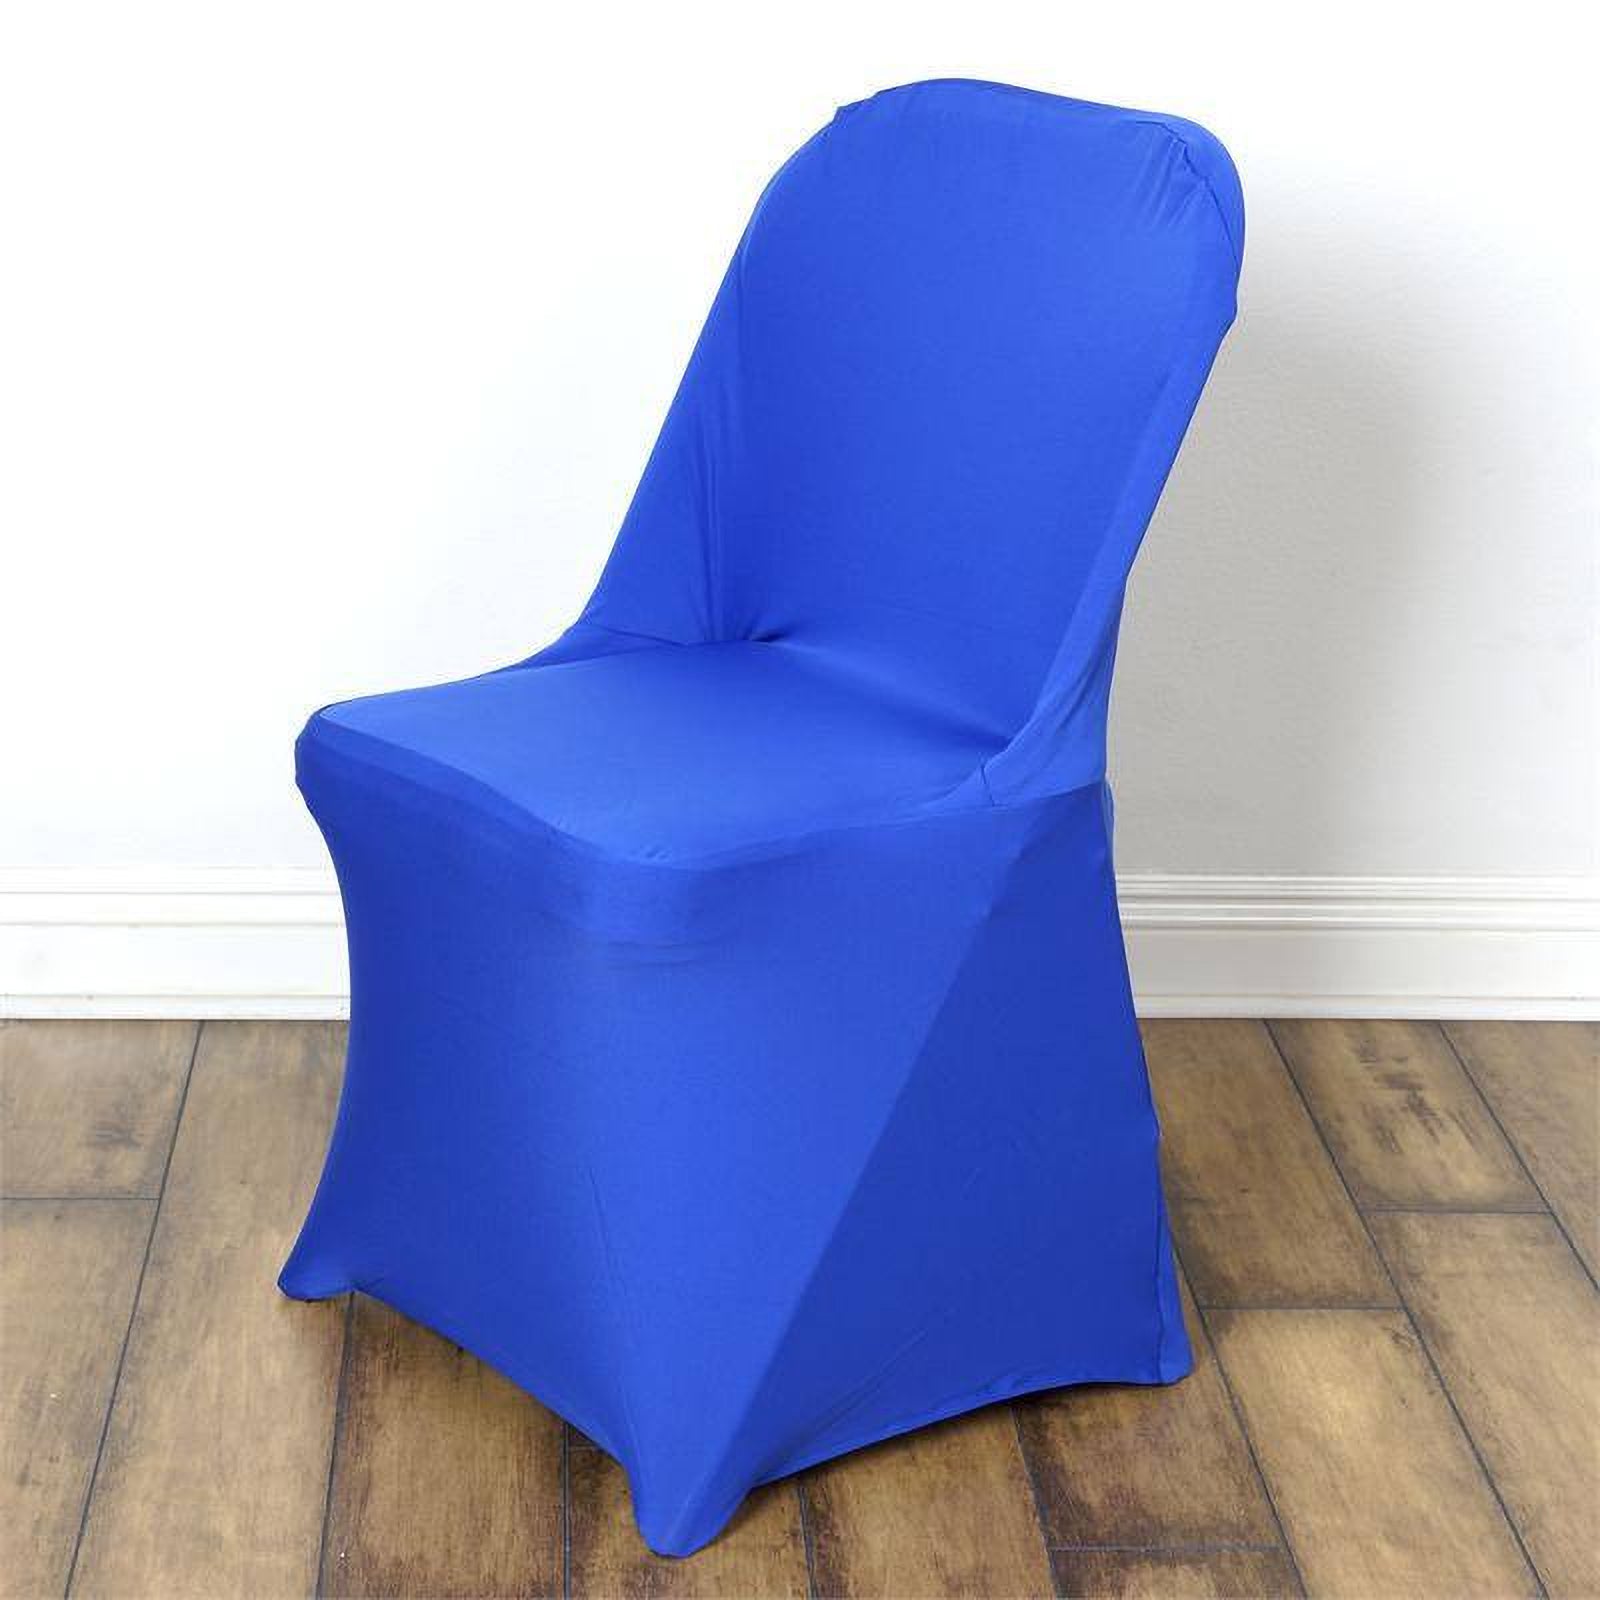 New in Stock: Spandex Folding Chair Covers